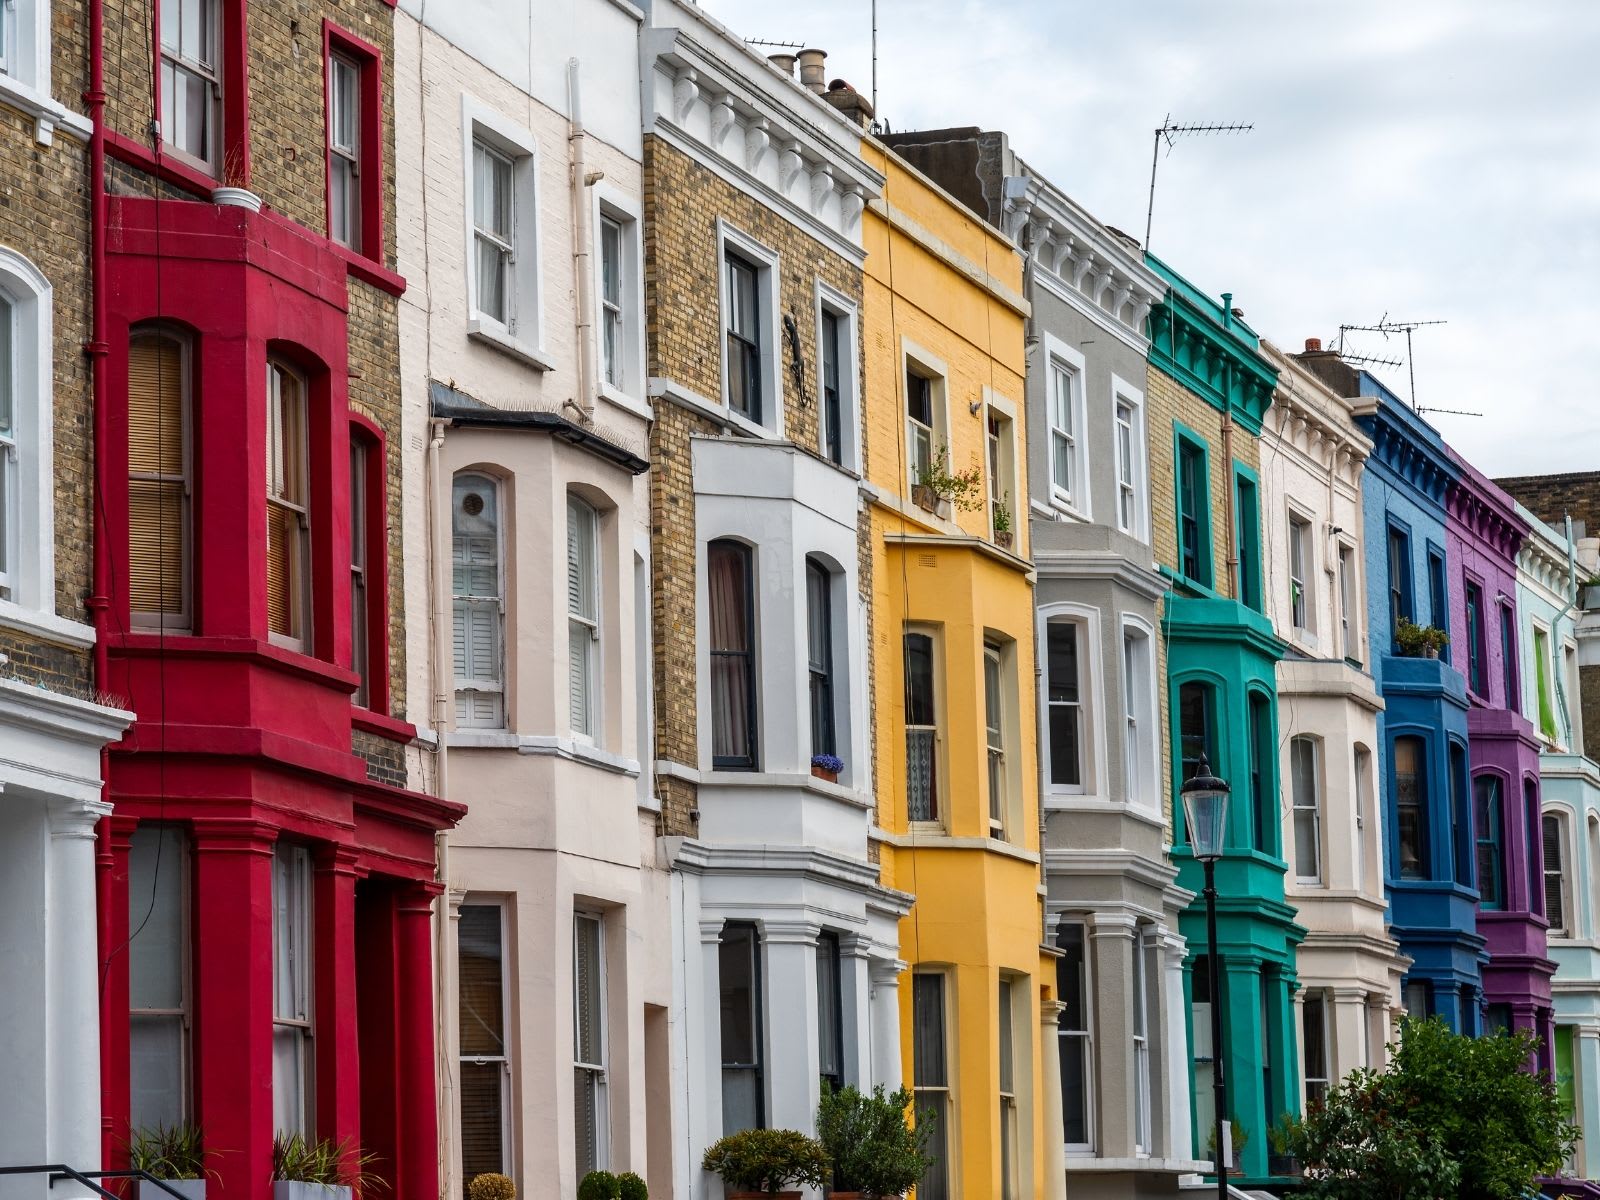 Colourful detached houses in Notting Hill